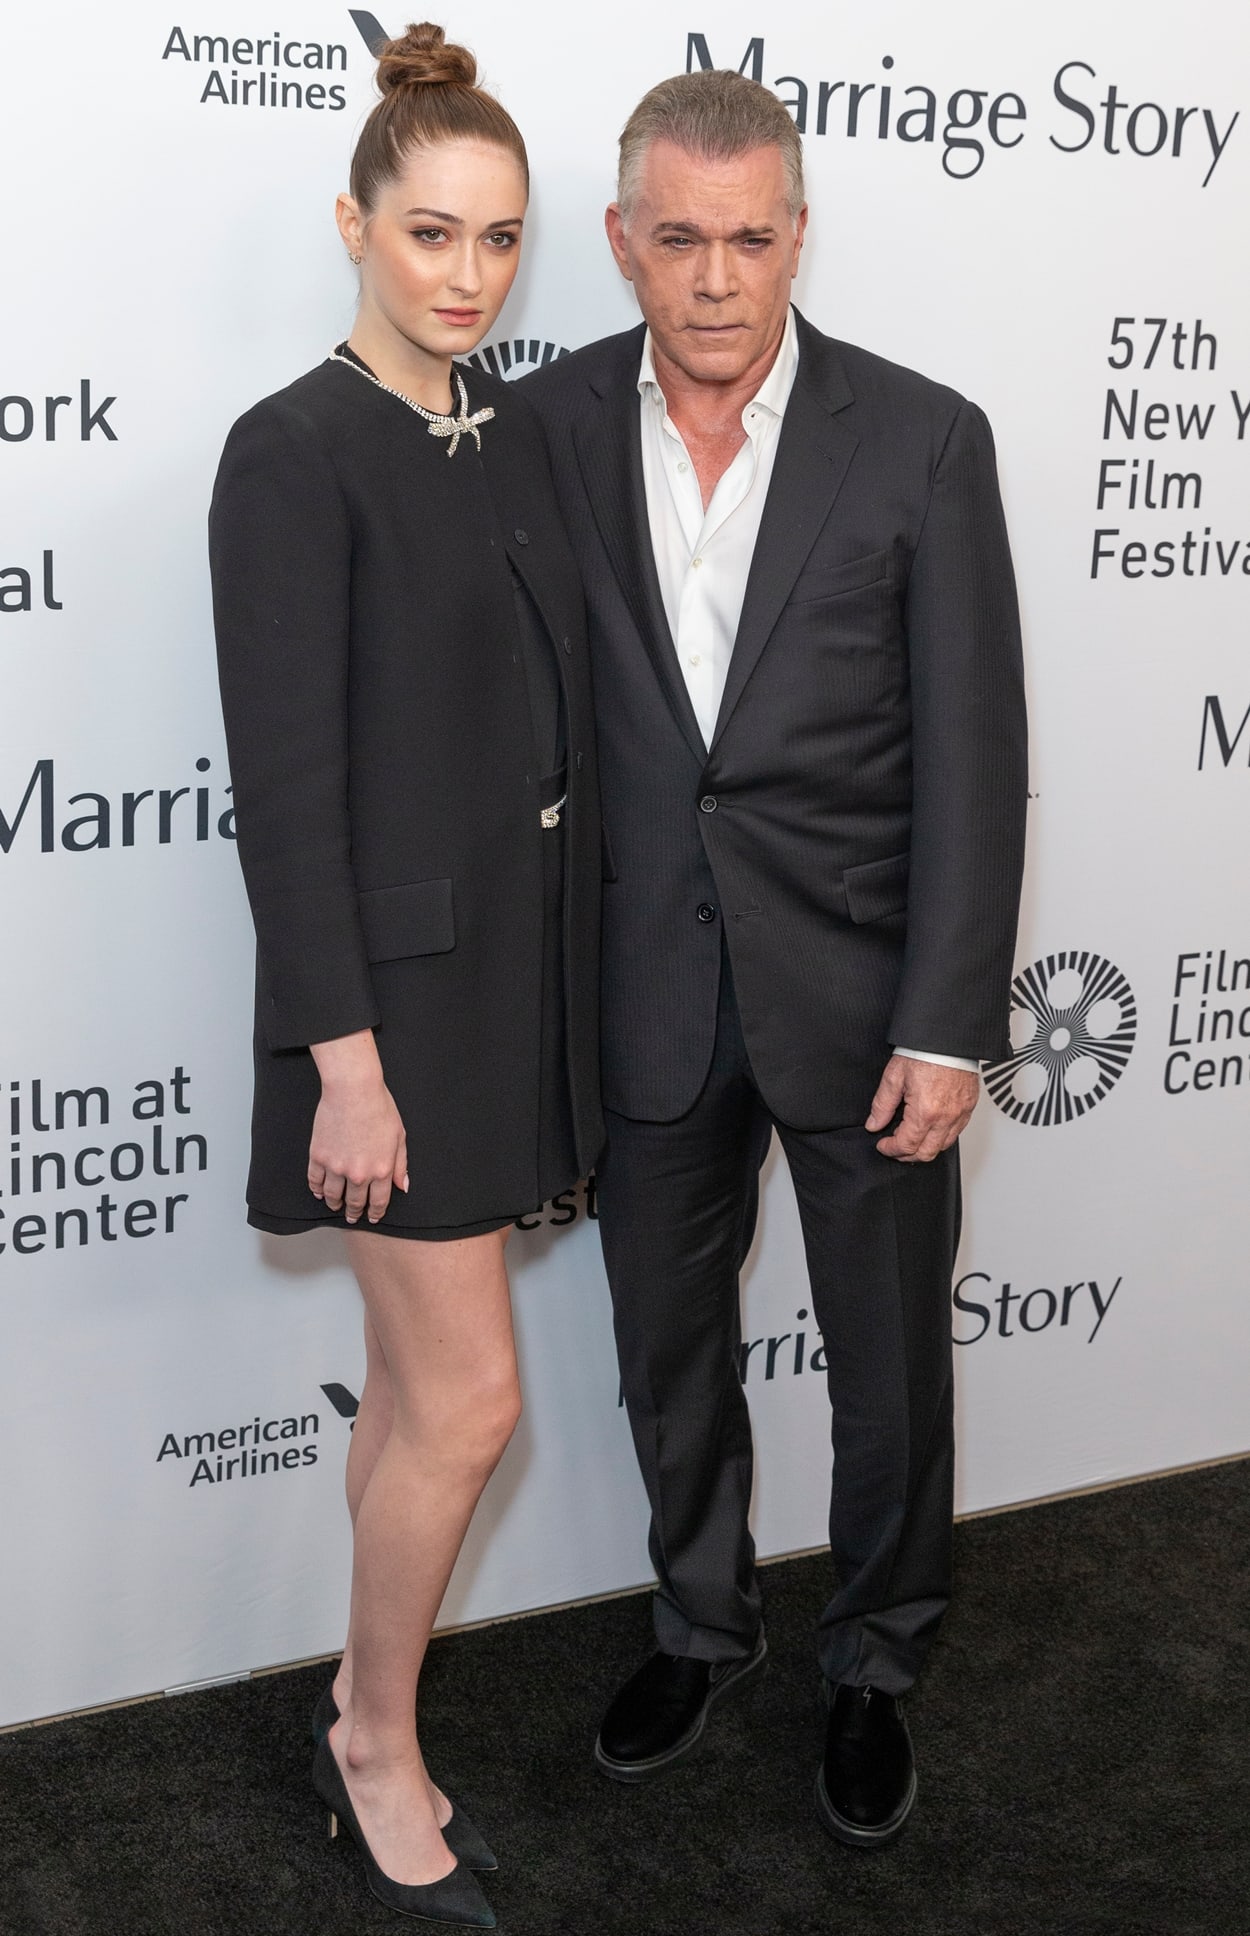 Karsen Liotta and her father Ray Liotta attend the "Marriage Story" premiere at the 57th New York Film Festival